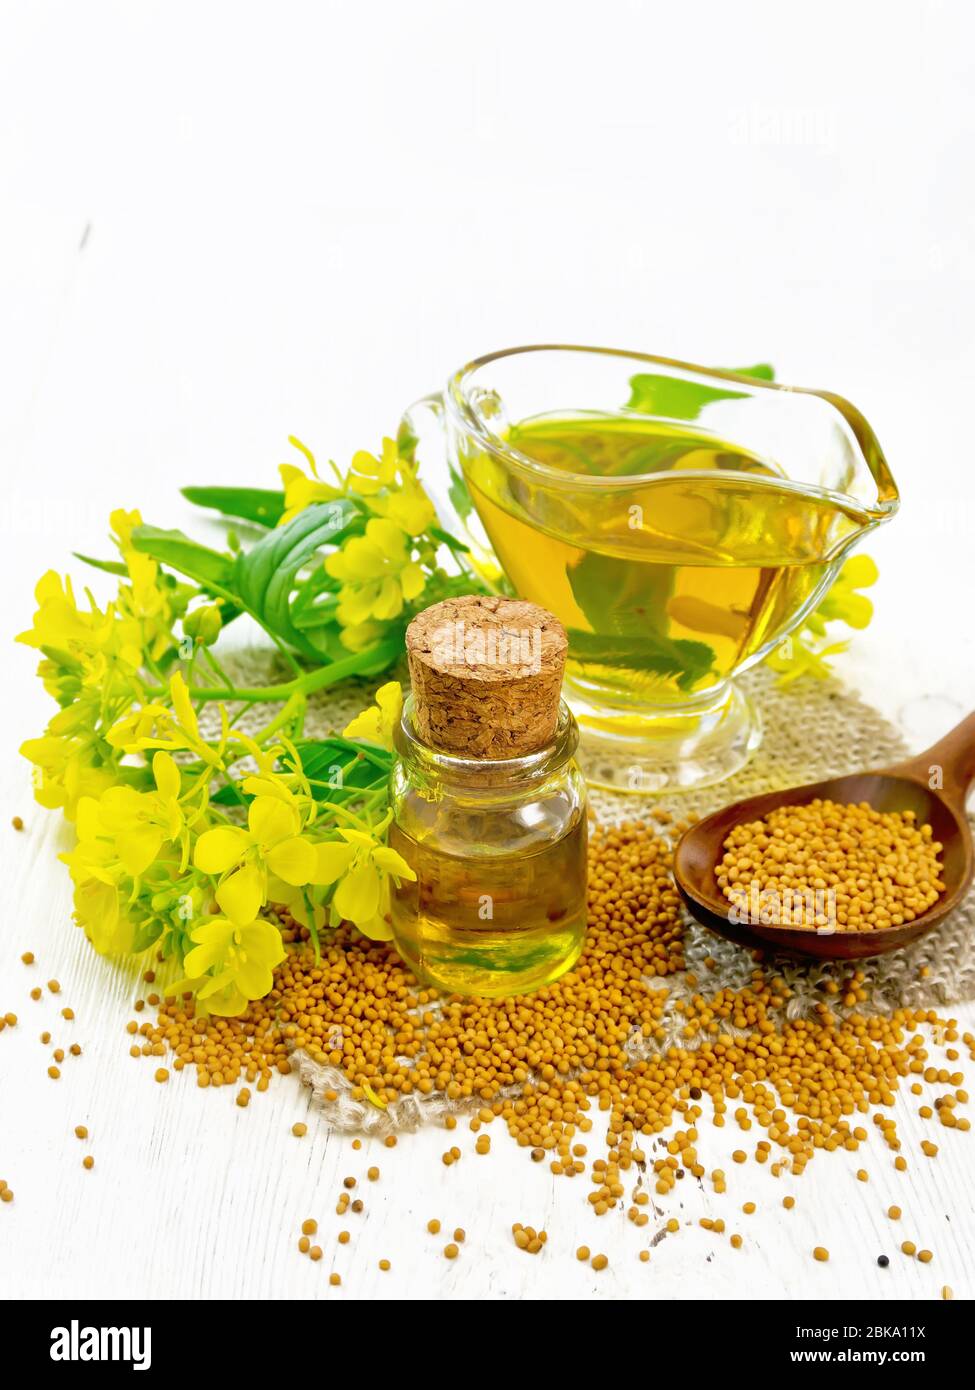 Mustard oil in a glass bottle and gravy boat, grains in a spoon and burlap,  yellow mustard flowers on wooden board background Stock Photo - Alamy